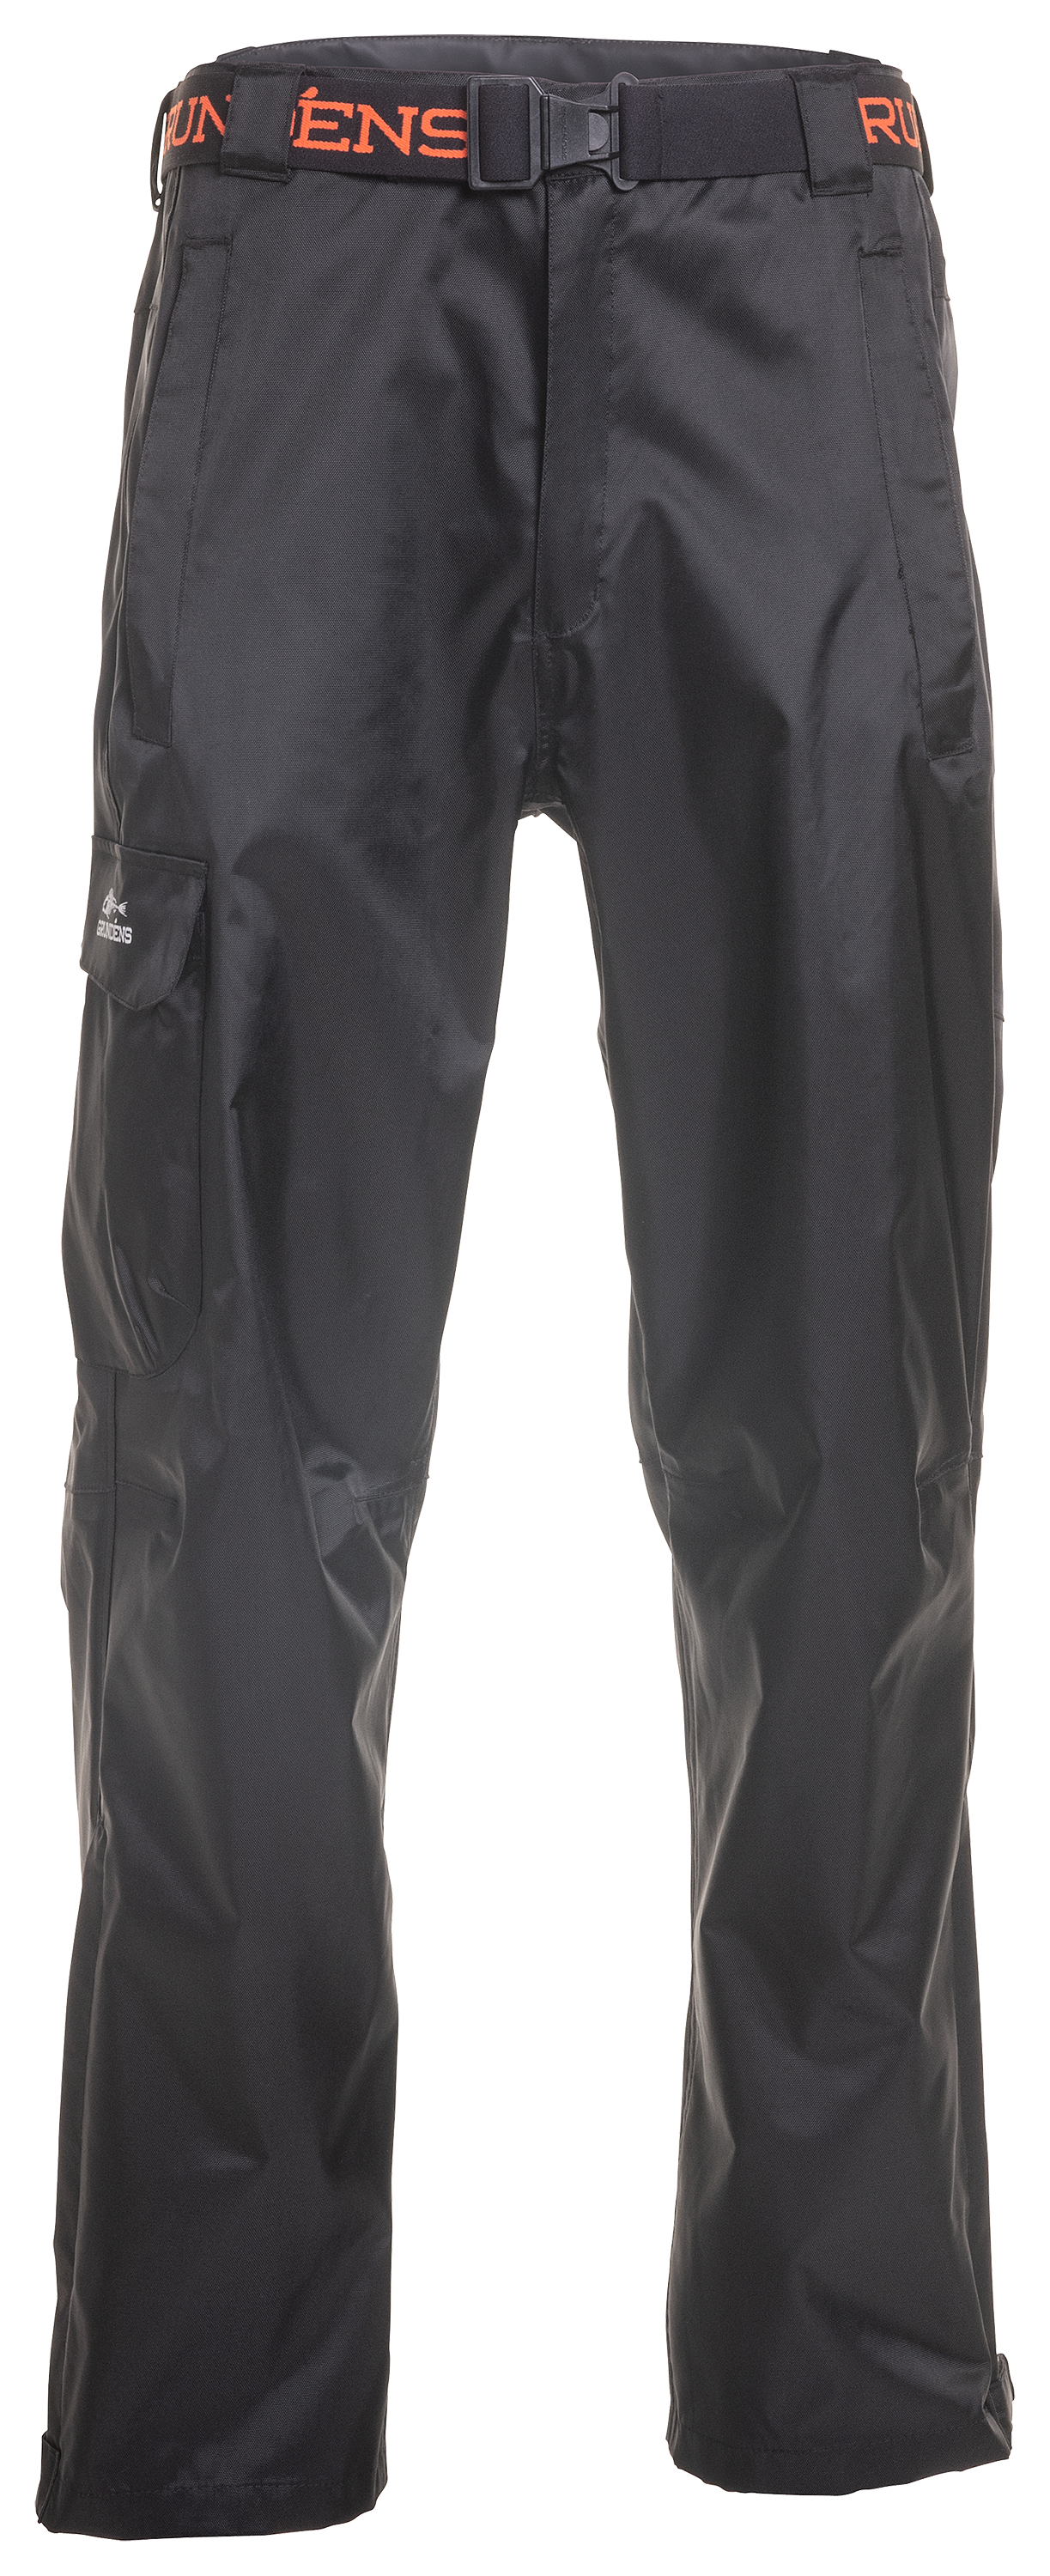 Grundens Gage Weather Watch Rain Pants for Men